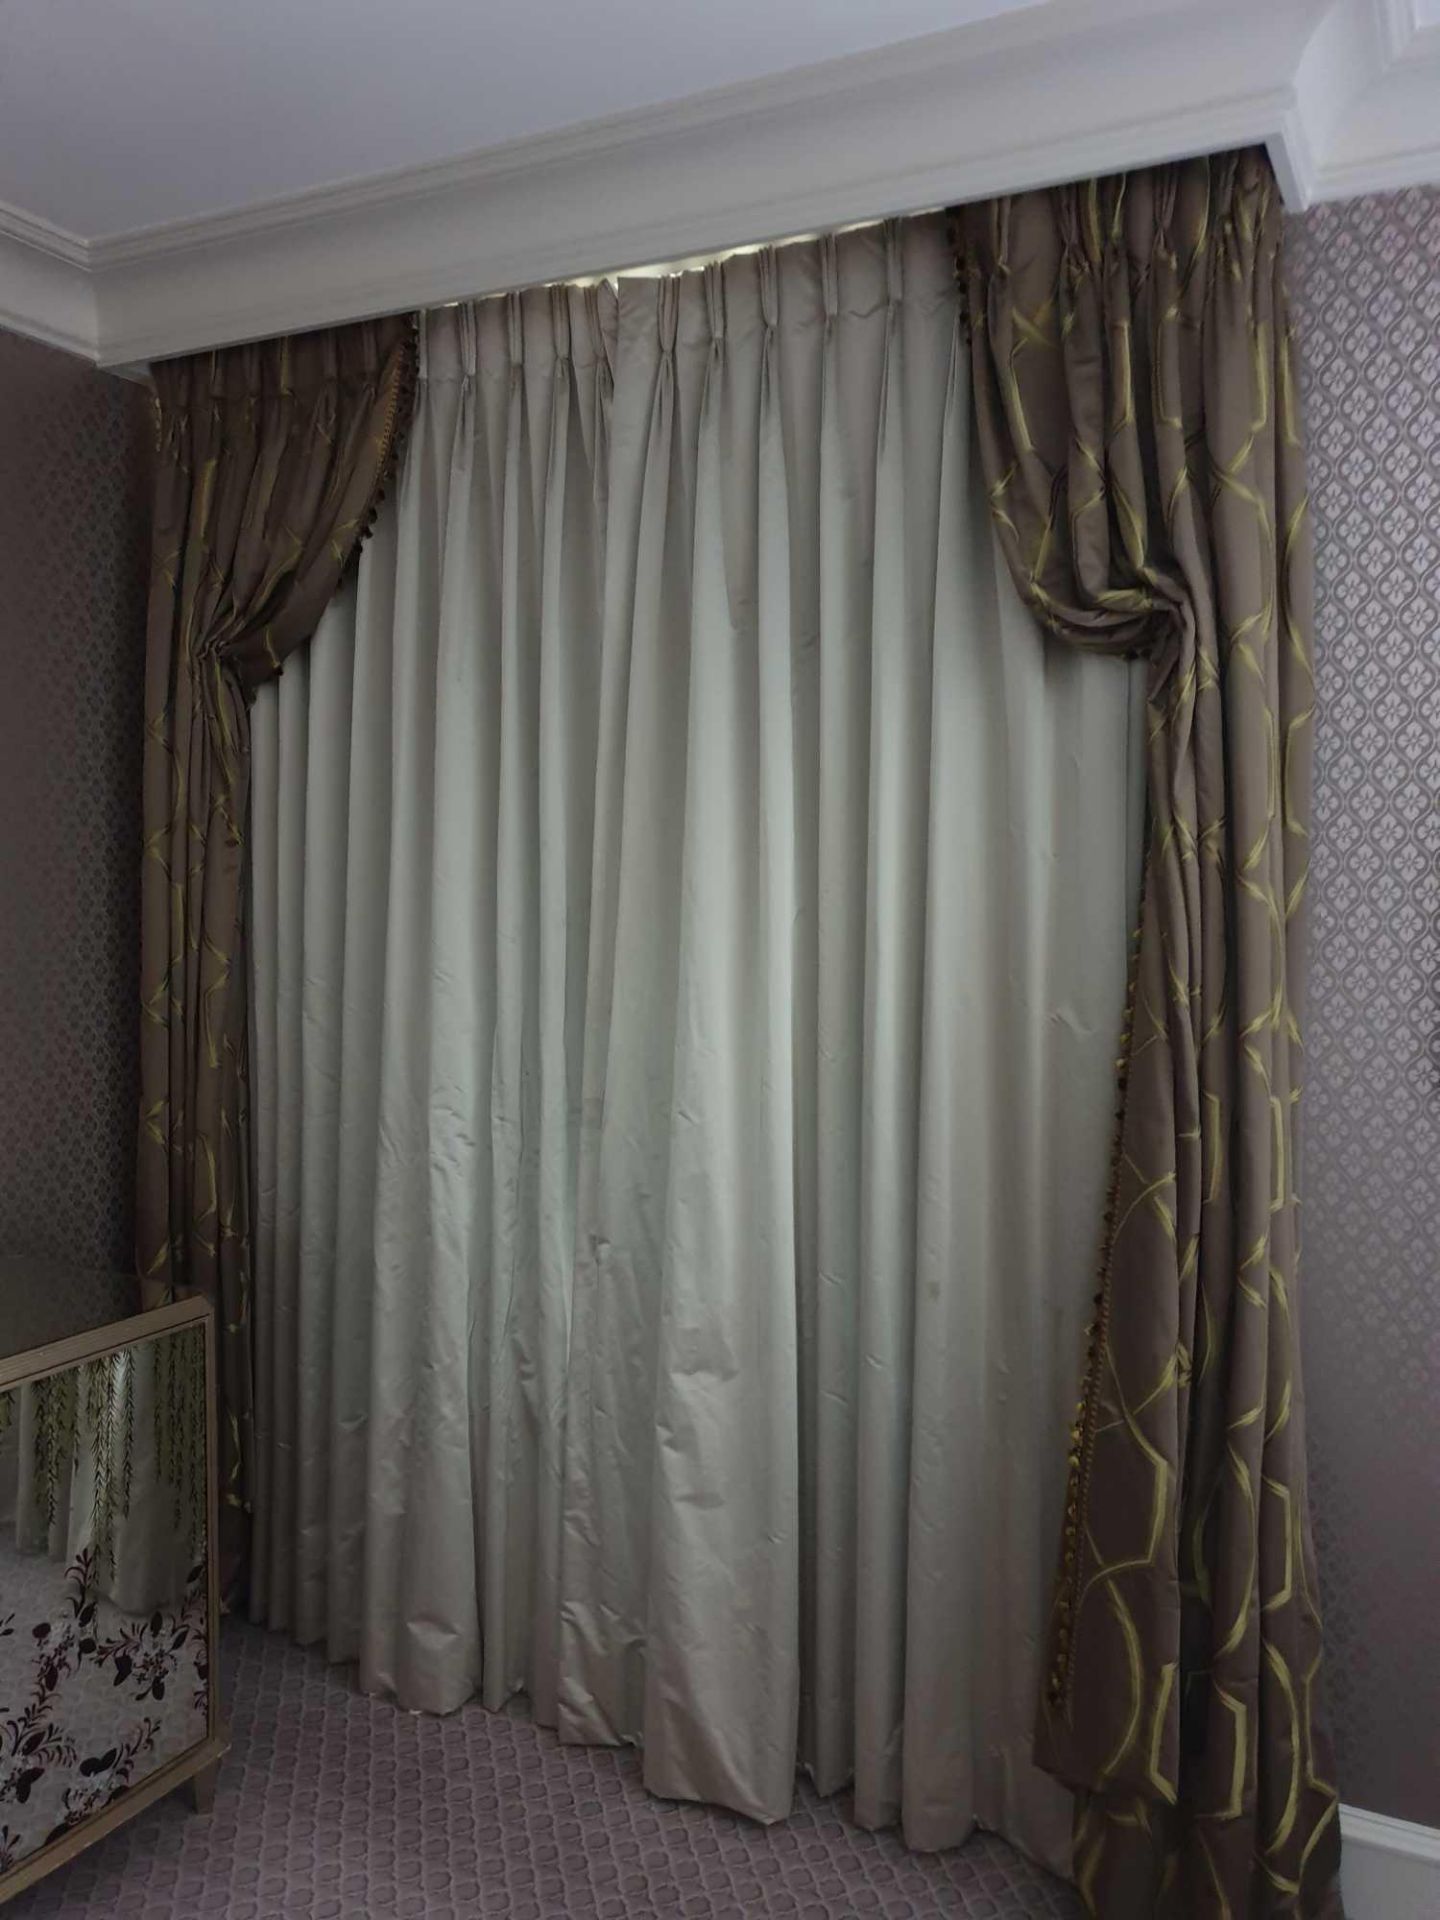 A Pair Of Silk Drapes And Jabots Dark Grey With Grey And Green Chain Style Pattern Tassel Trim And